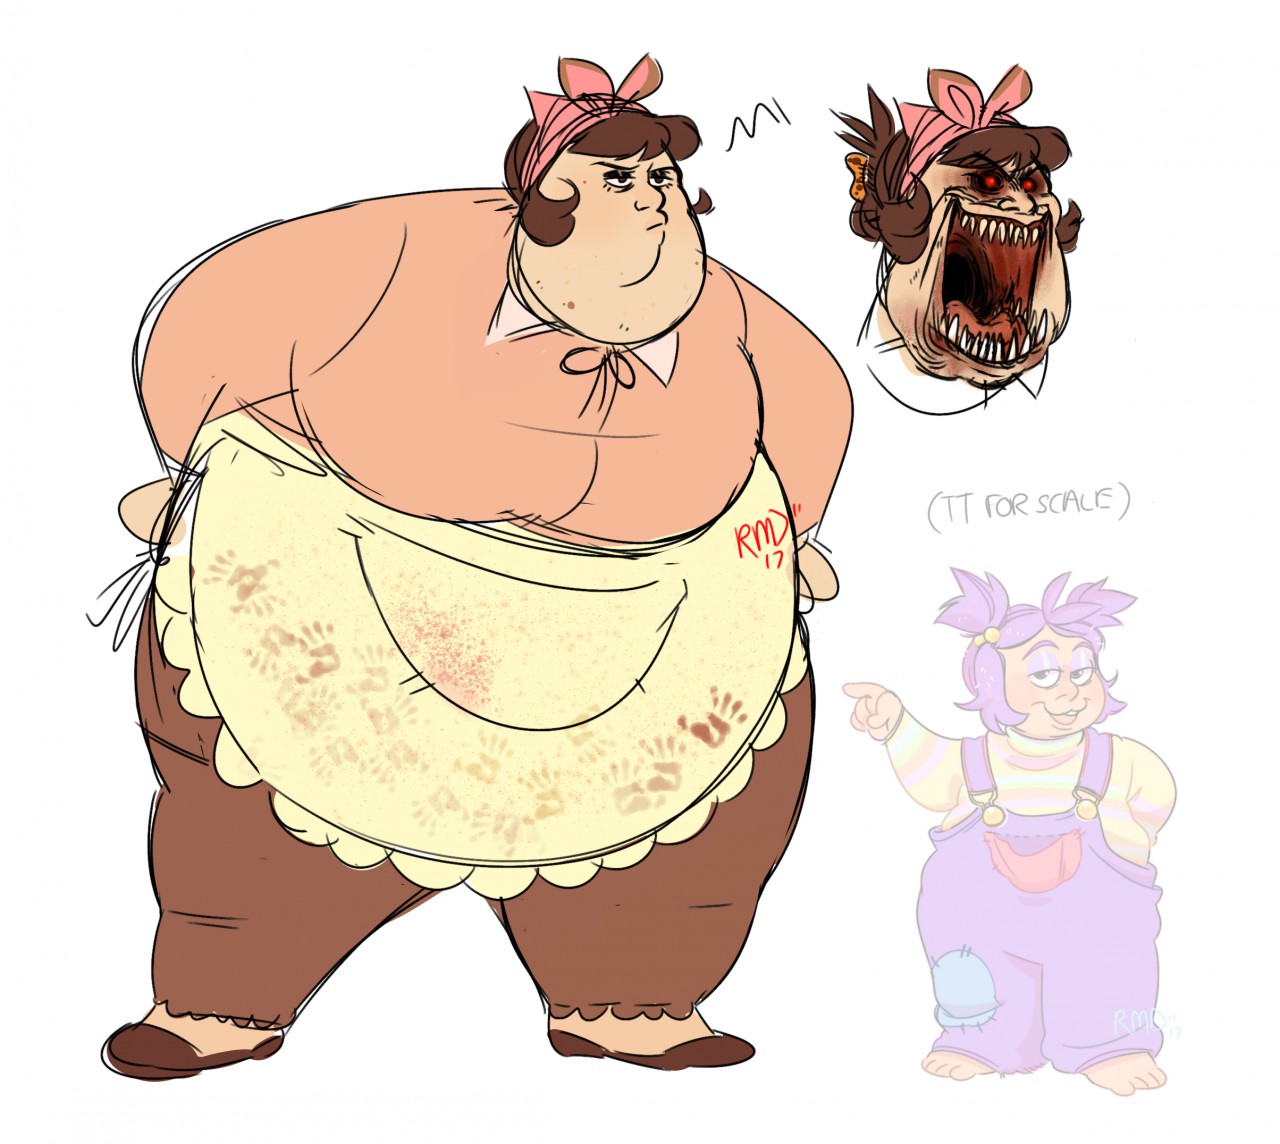 Where are my children?! I wanted to make my own human version of mama  tattletail, because I love this game. On the right we see a woman dressed  in the 90s with